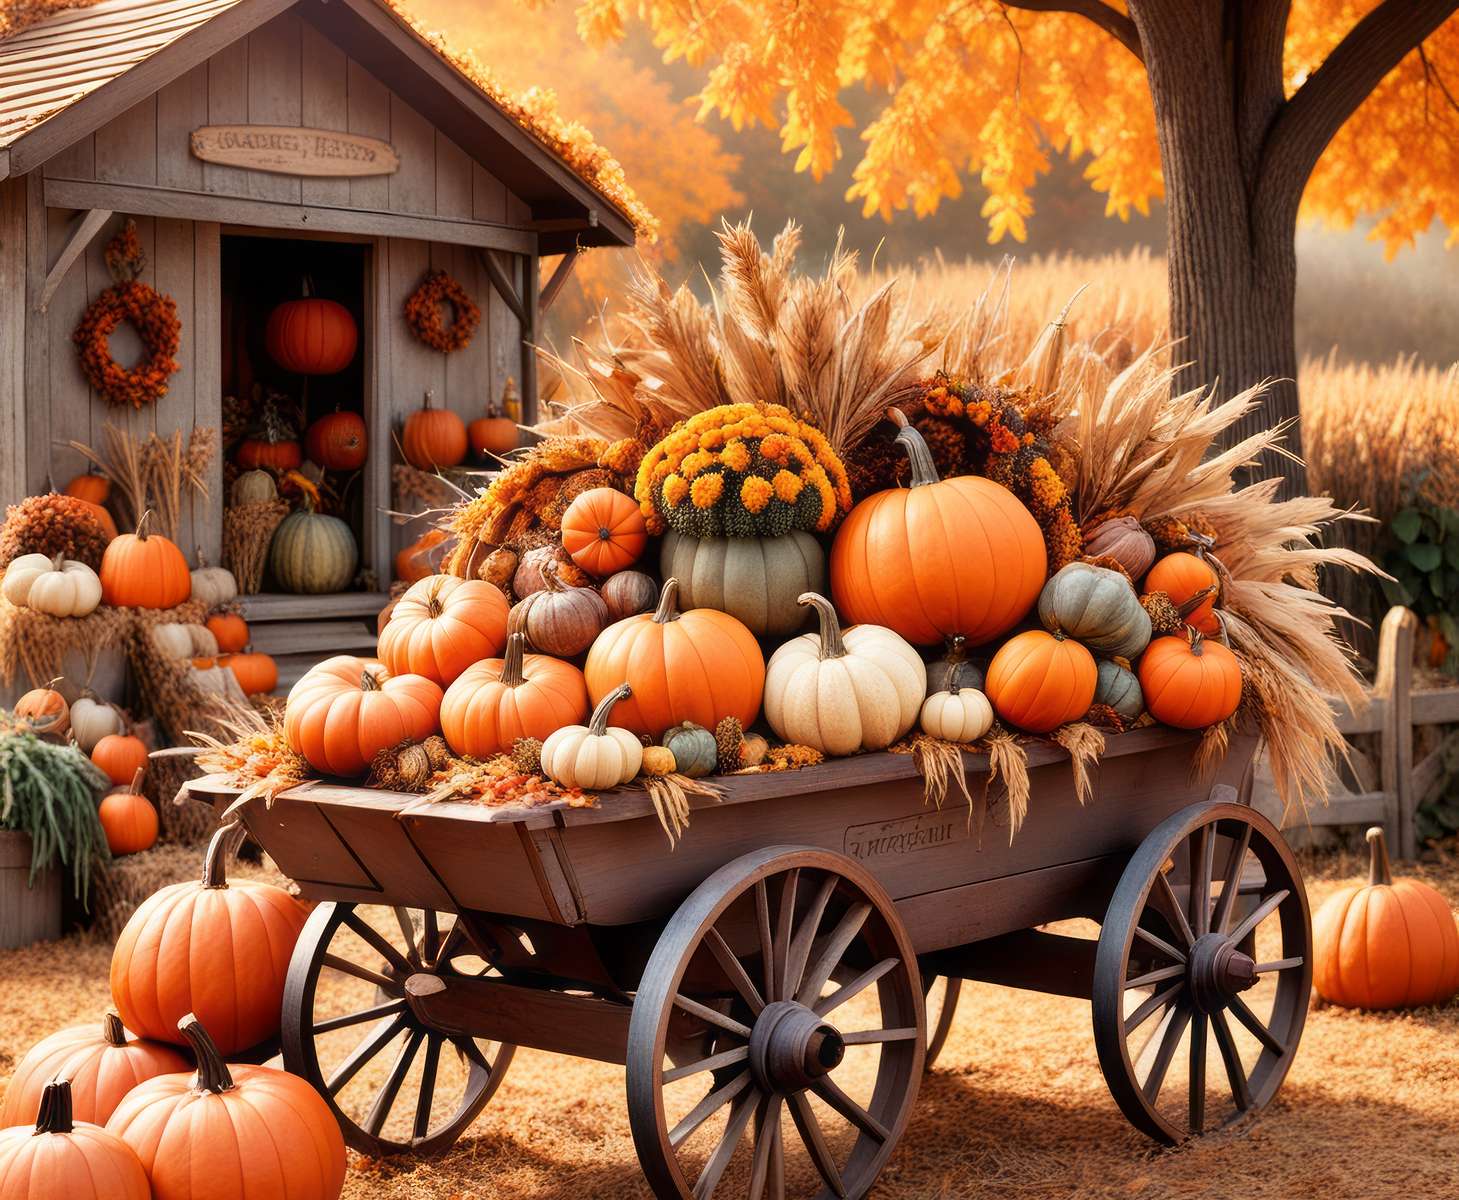 Stroller with autumn decorations online puzzle